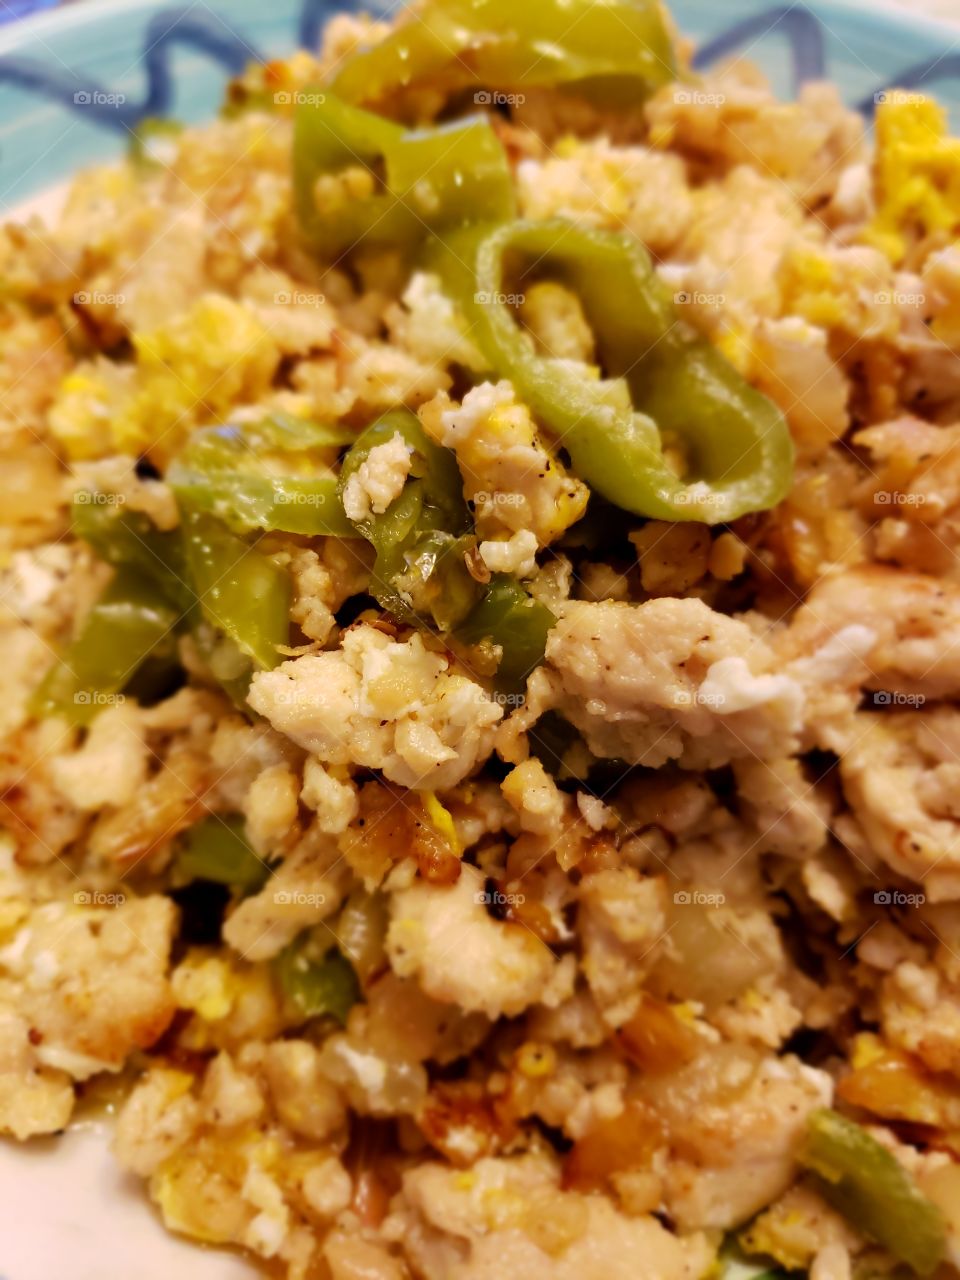 A filipino dish called Chicken Sisig. I made this dish for dinner and took a picture of it.